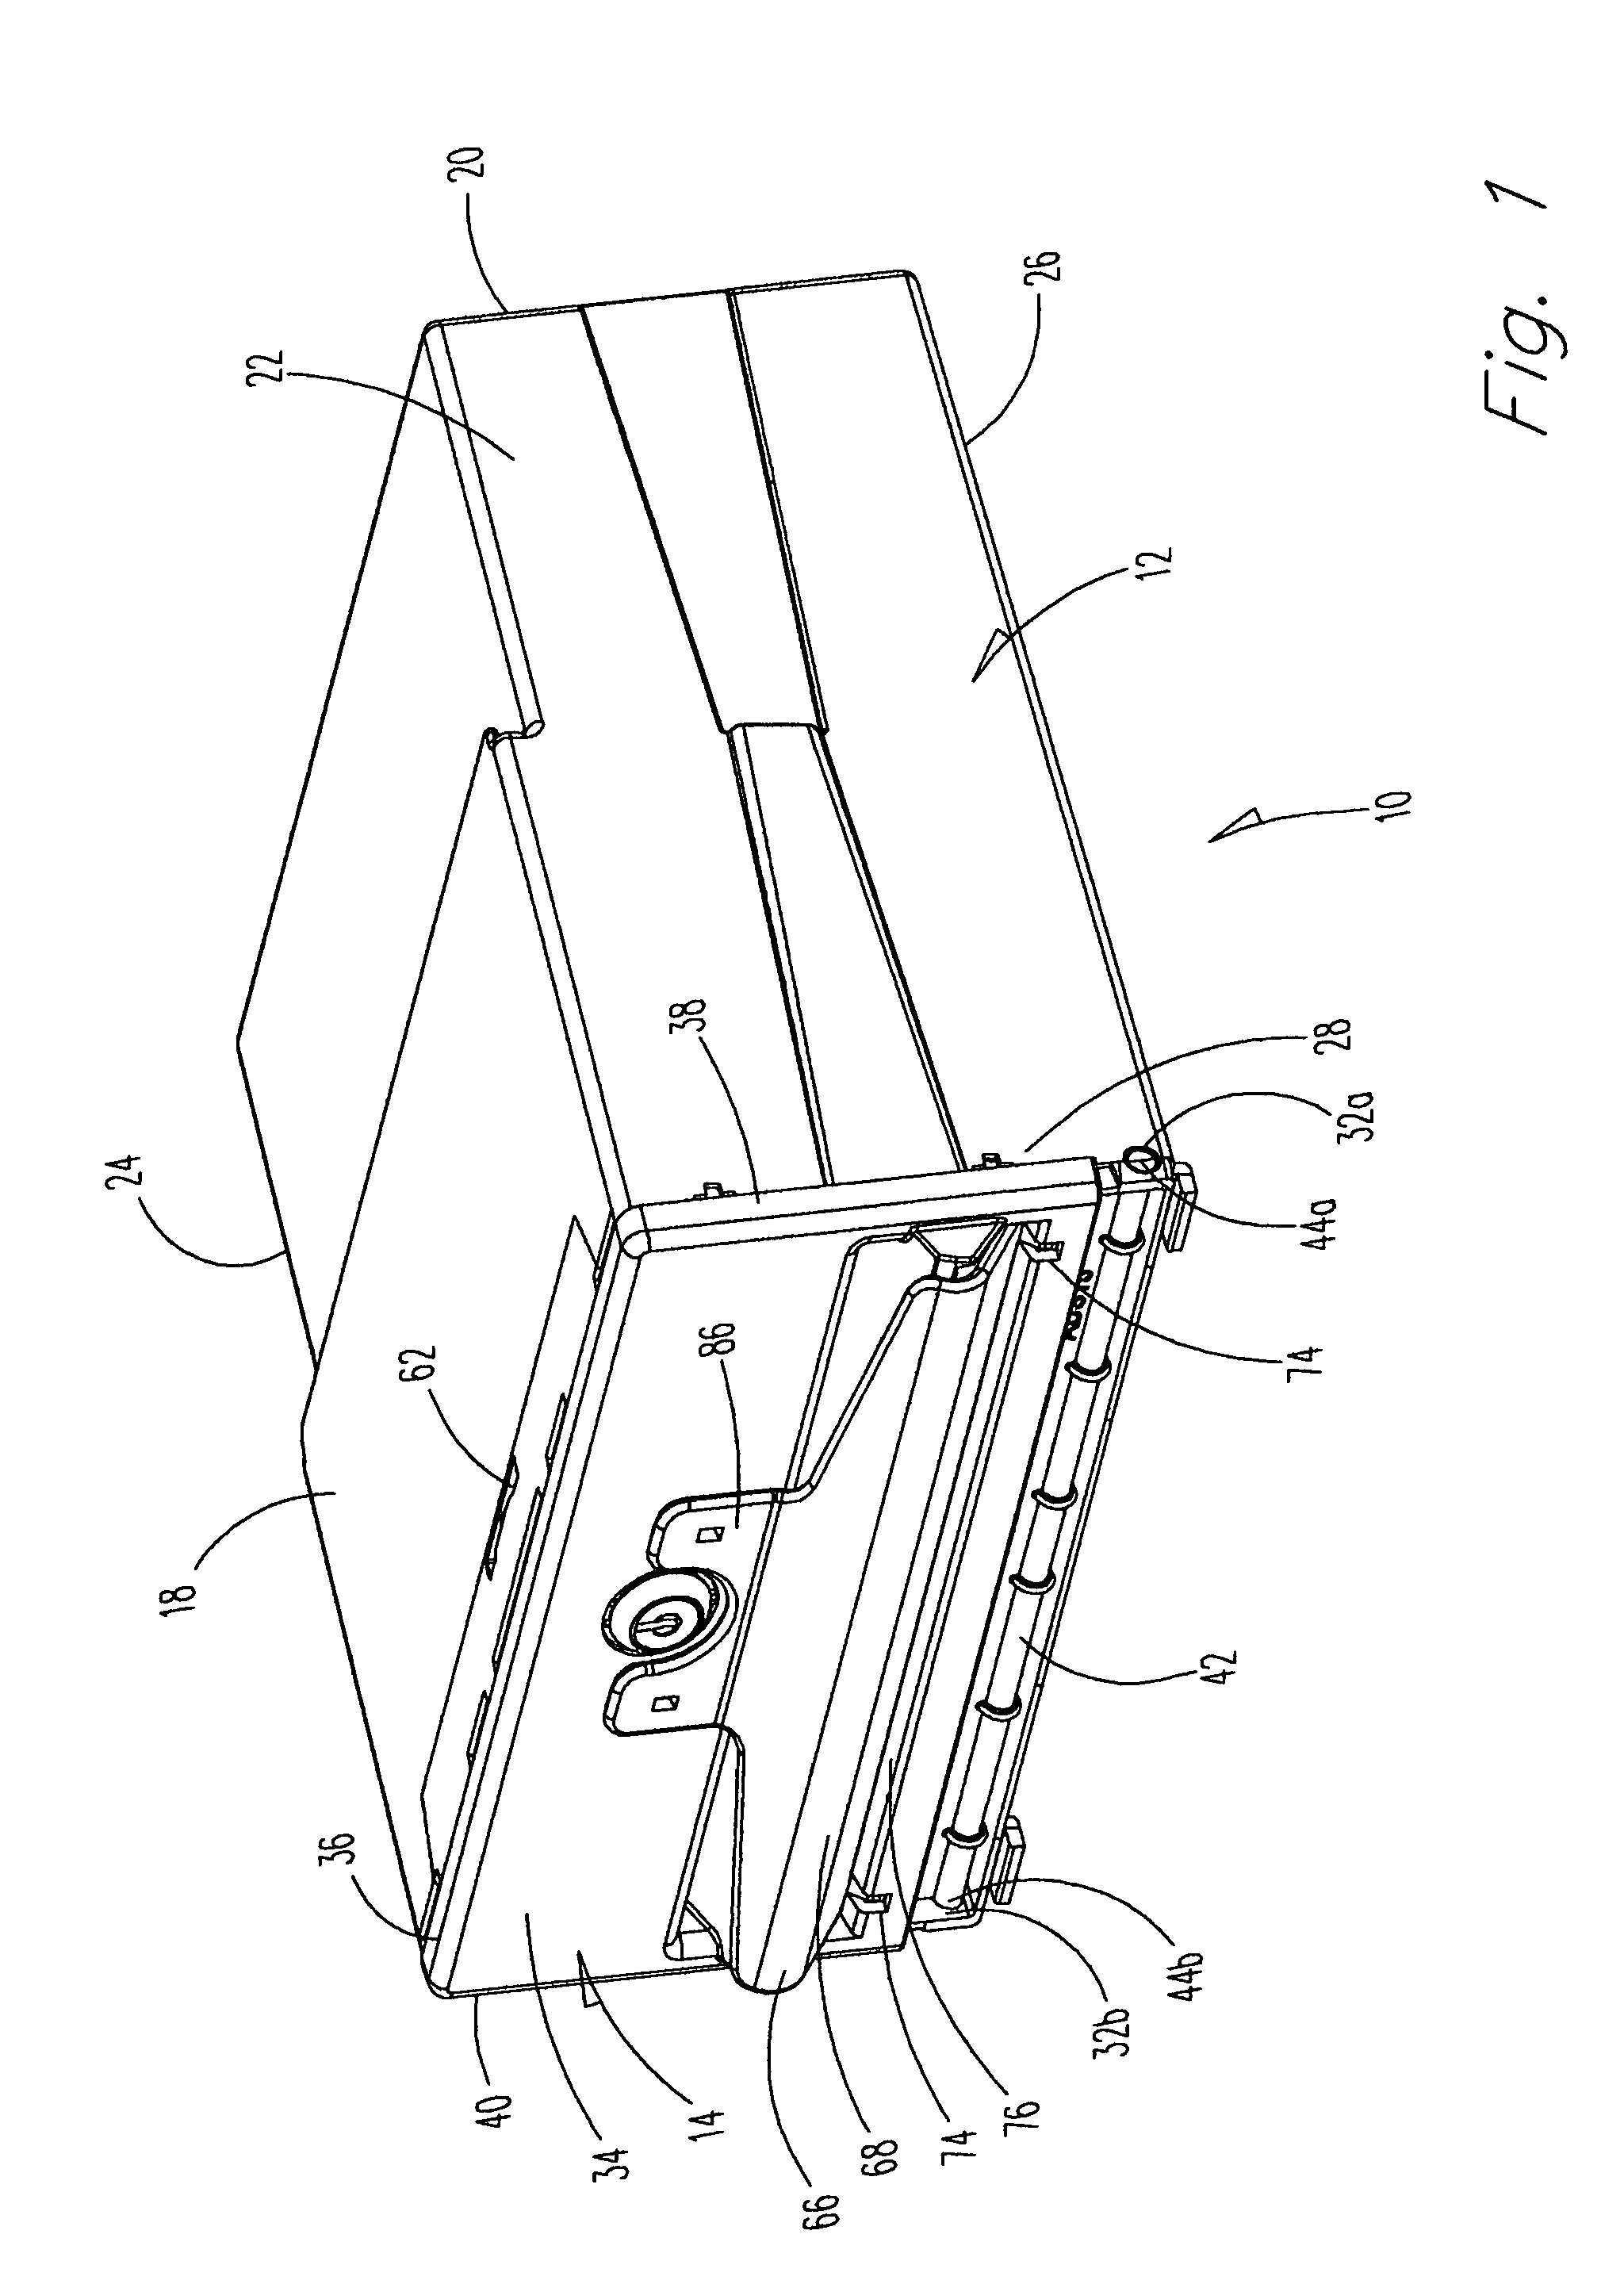 Display and dispensing device with a security shield